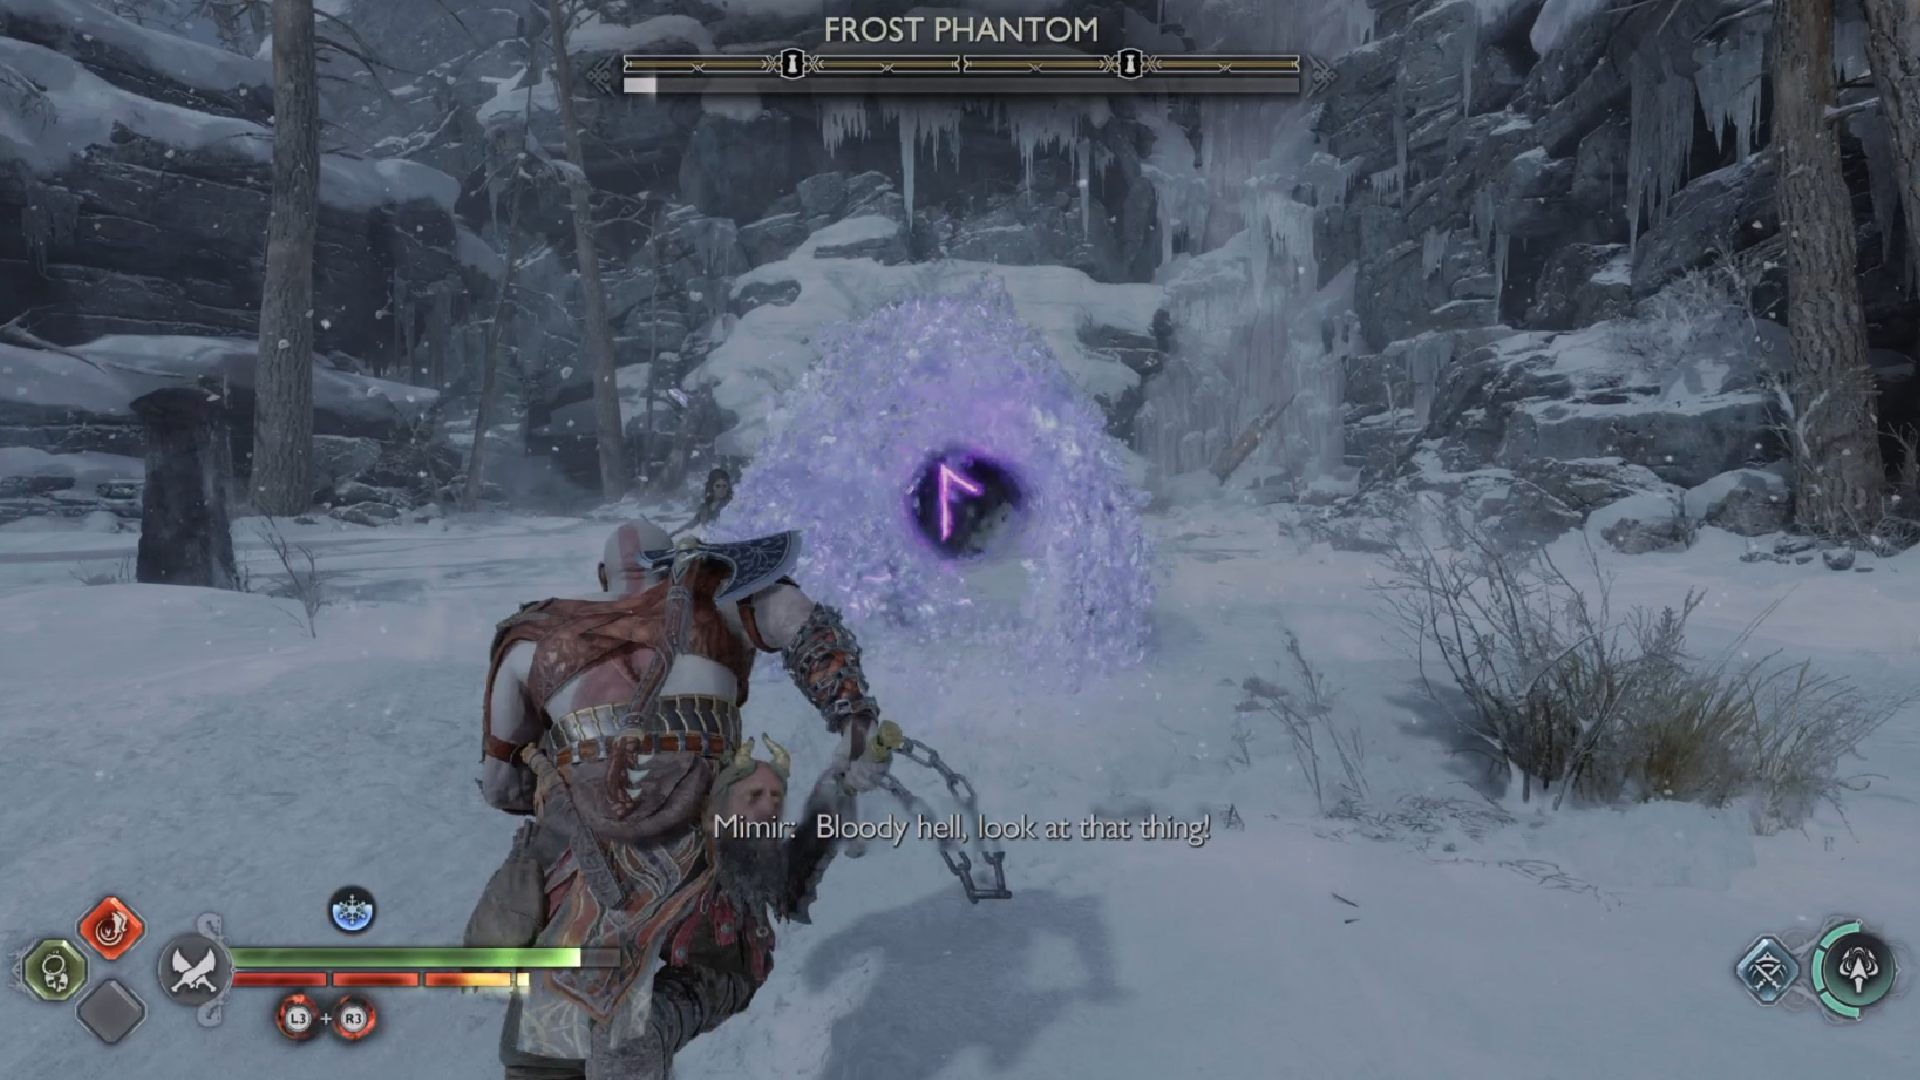 God of War Ragnarok Chaos Flame Locations: Kratos can be seen fighting a Frost Phantom